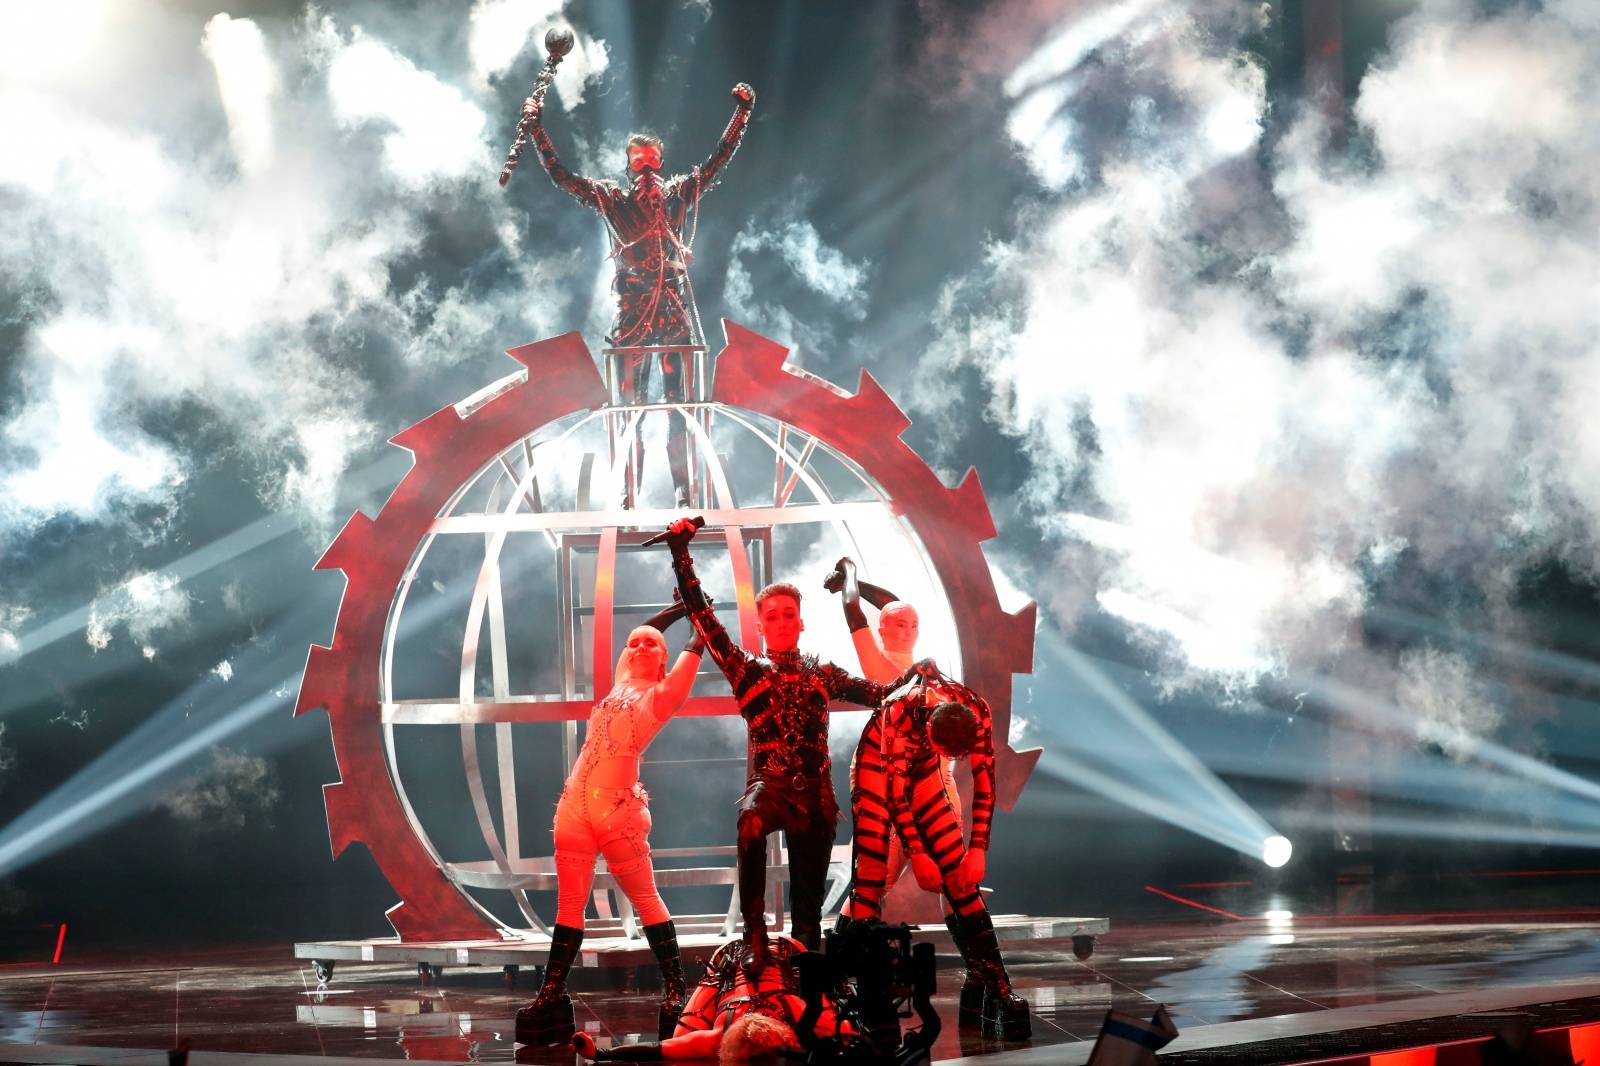 Participant Hatari of Iceland performs during the Grand Final of the 2019 Eurovision Song Contest in Tel Aviv, Israel